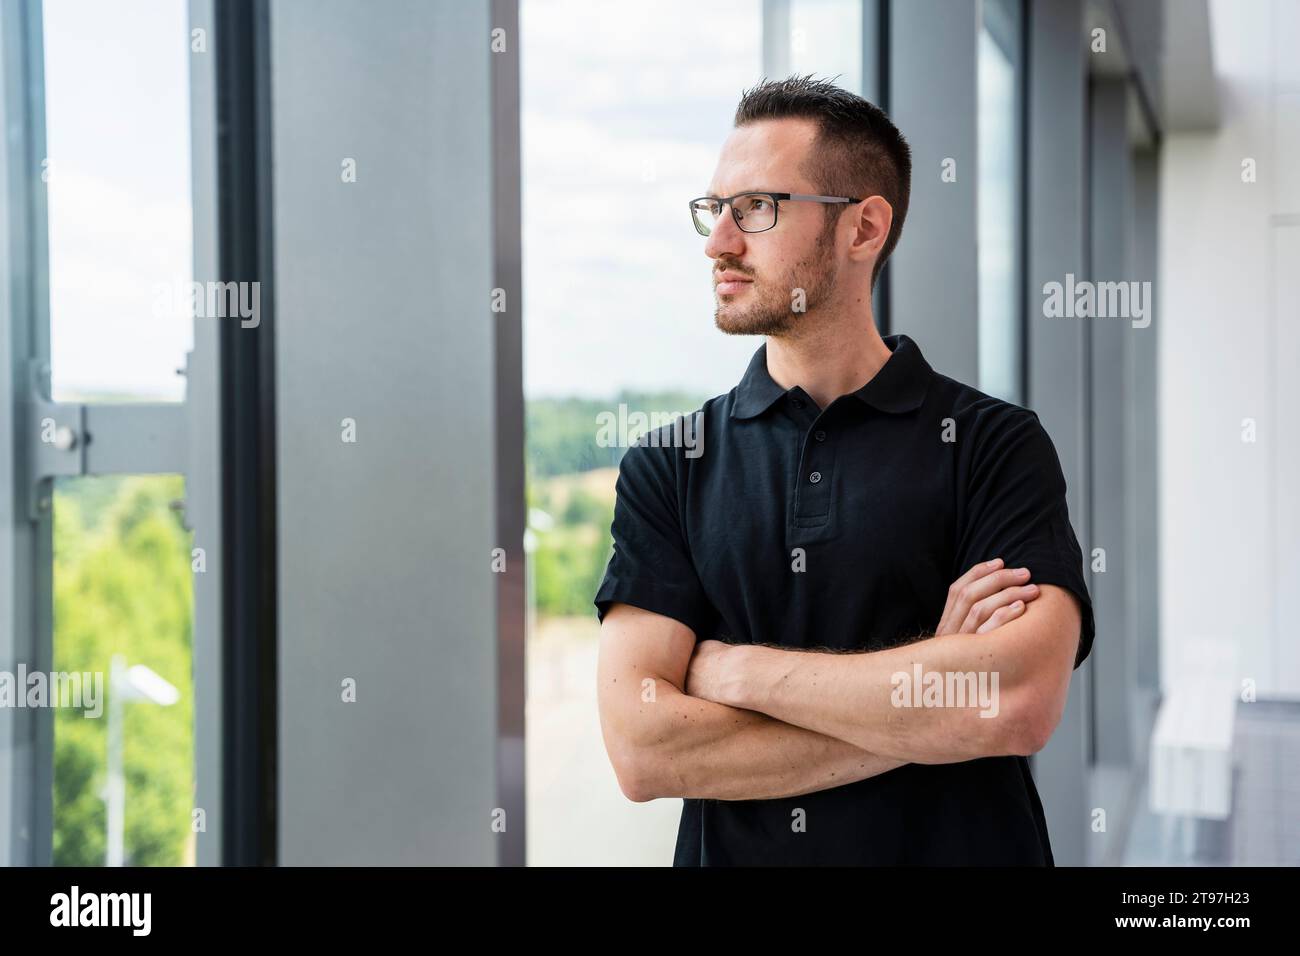 Contemplating businessman looking out of window with arms crossed Stock Photo